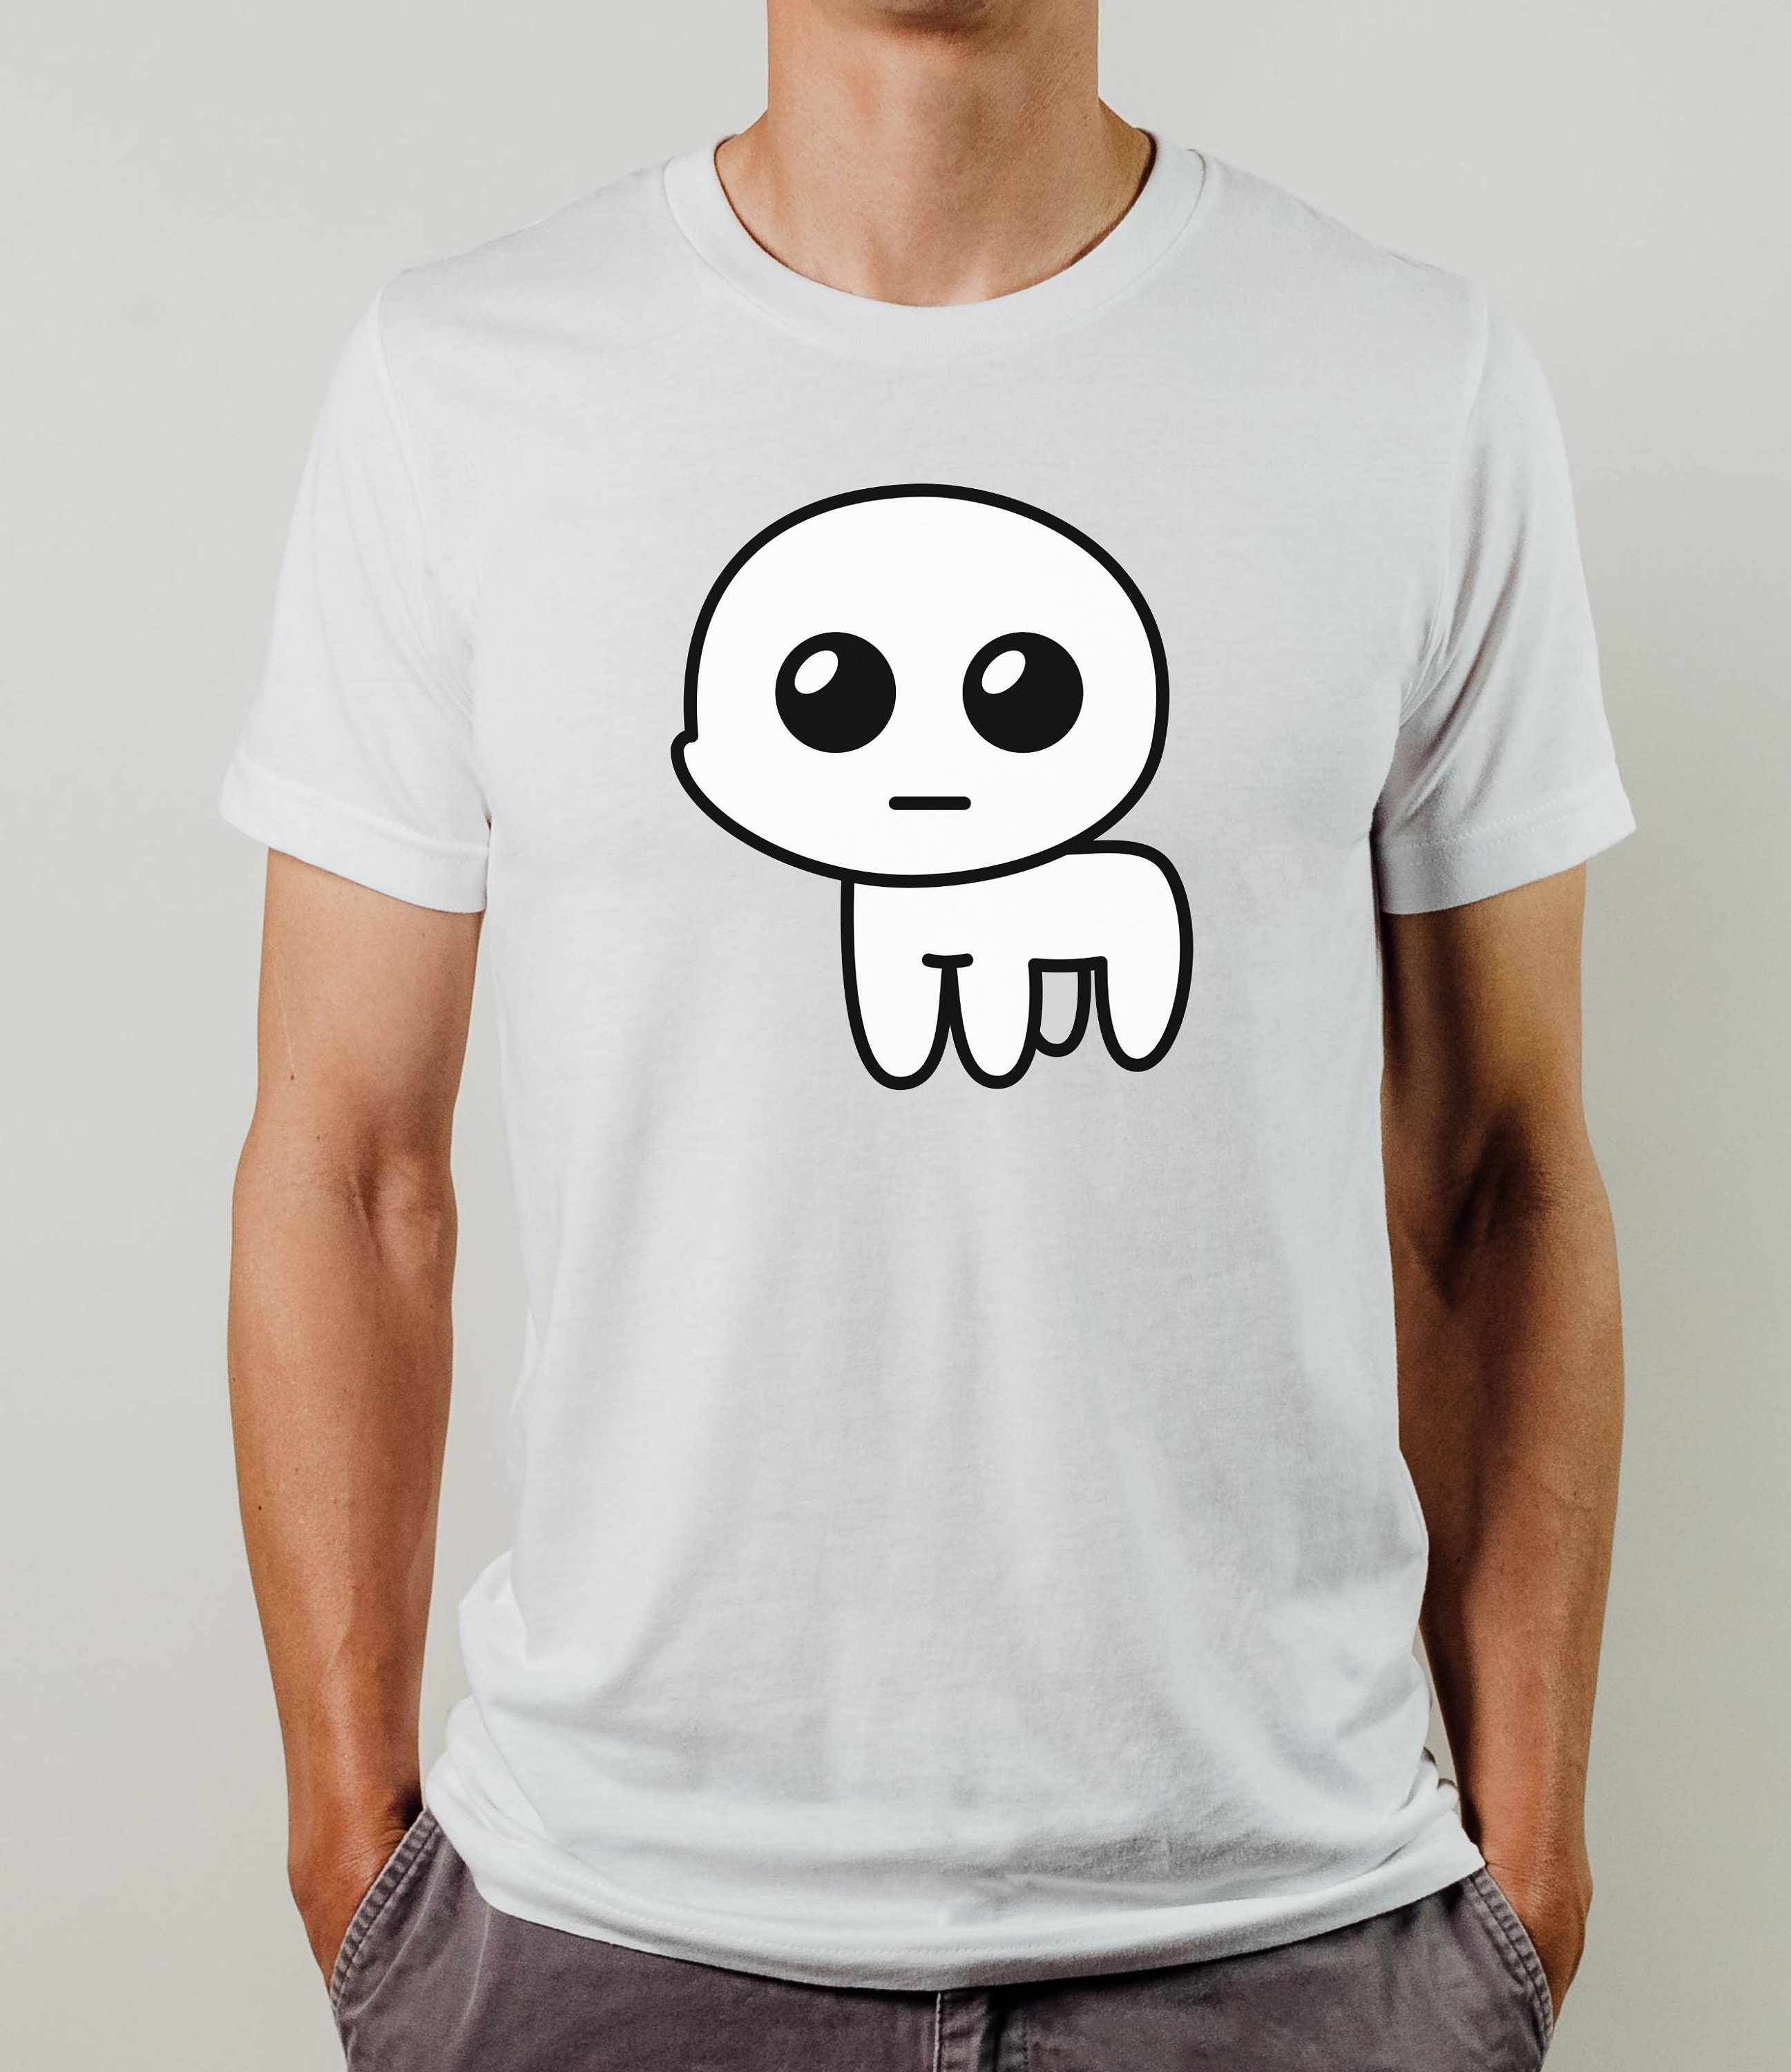  TBH Autism Creature Meme With Headphones T-Shirt